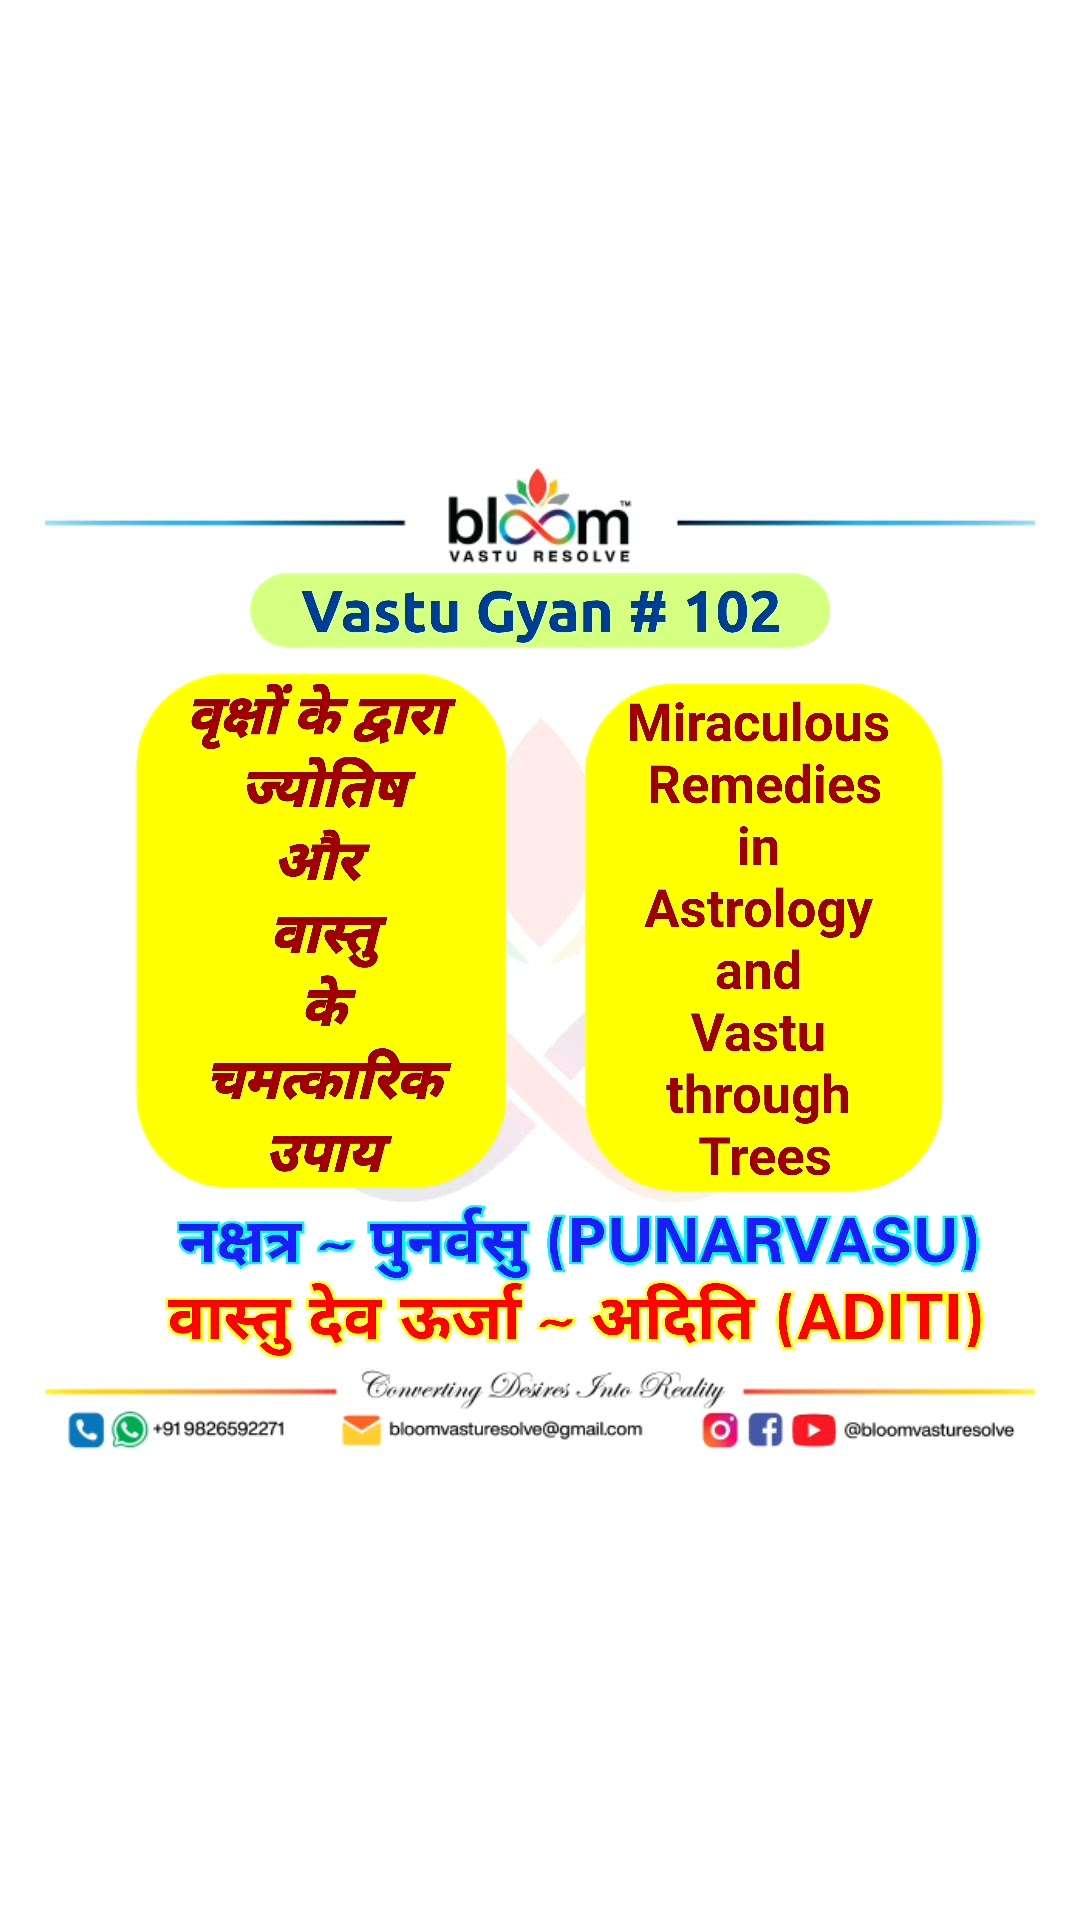 Which Nakshatra tree do you want to know, kindly write in the comment box.

For more Vastu please follow @bloomvasturesolve
on YouTube, Instagram & Facebook
.
.
For personal consultation, feel free to contact certified MahaVastu Expert through
M - 9826592271
Or
bloomvasturesolve@gmail.com

#vastu 
#mahavastu 
#mahavastuexpert
#bloomvasturesolve
#BirthConstellationTree
#vasturemedies
#astrovastu
#astrology
#DivineEnergyRemedy
#Sacredtree
#punarvasu
#aditi
#indian_gum_arabic_tree
#babool
#बबूल